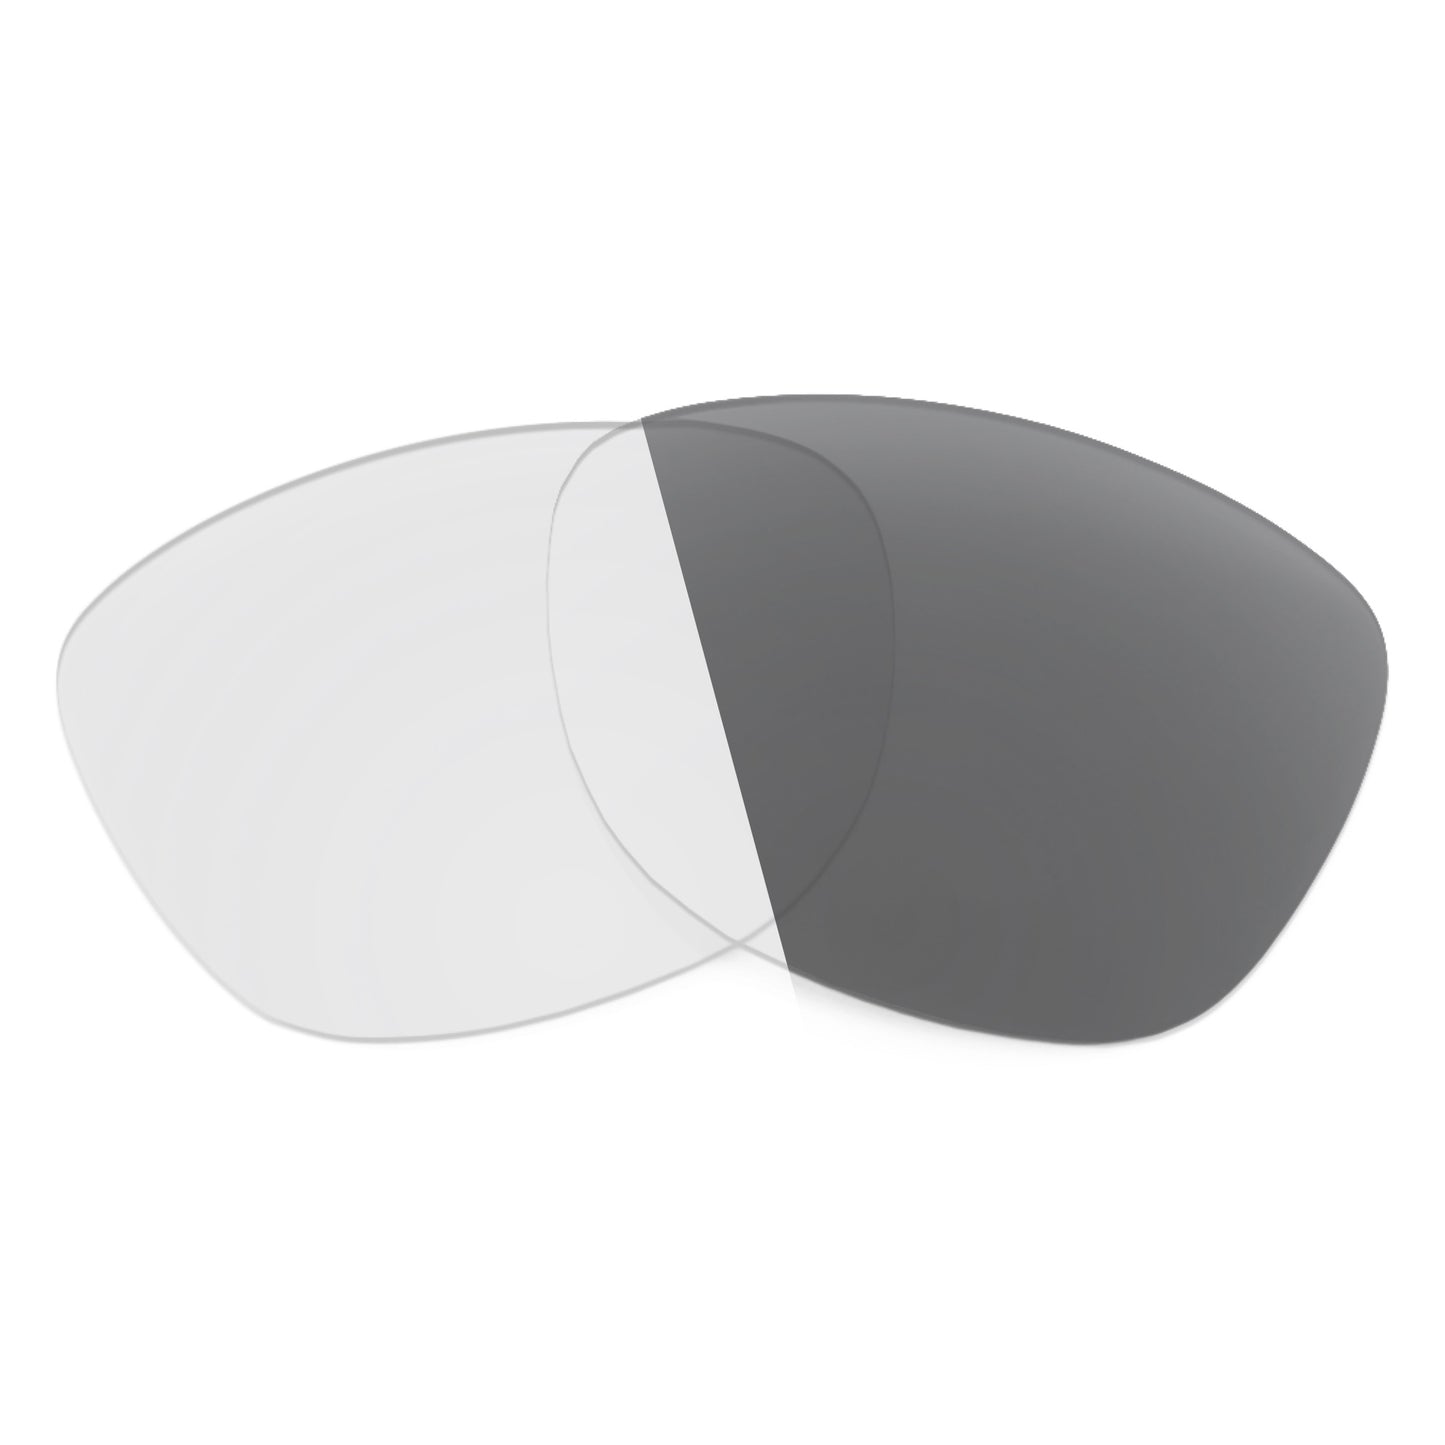 Revant replacement lenses for Ray-Ban RB4250 52mm Non-Polarized Adapt Gray Photochromic